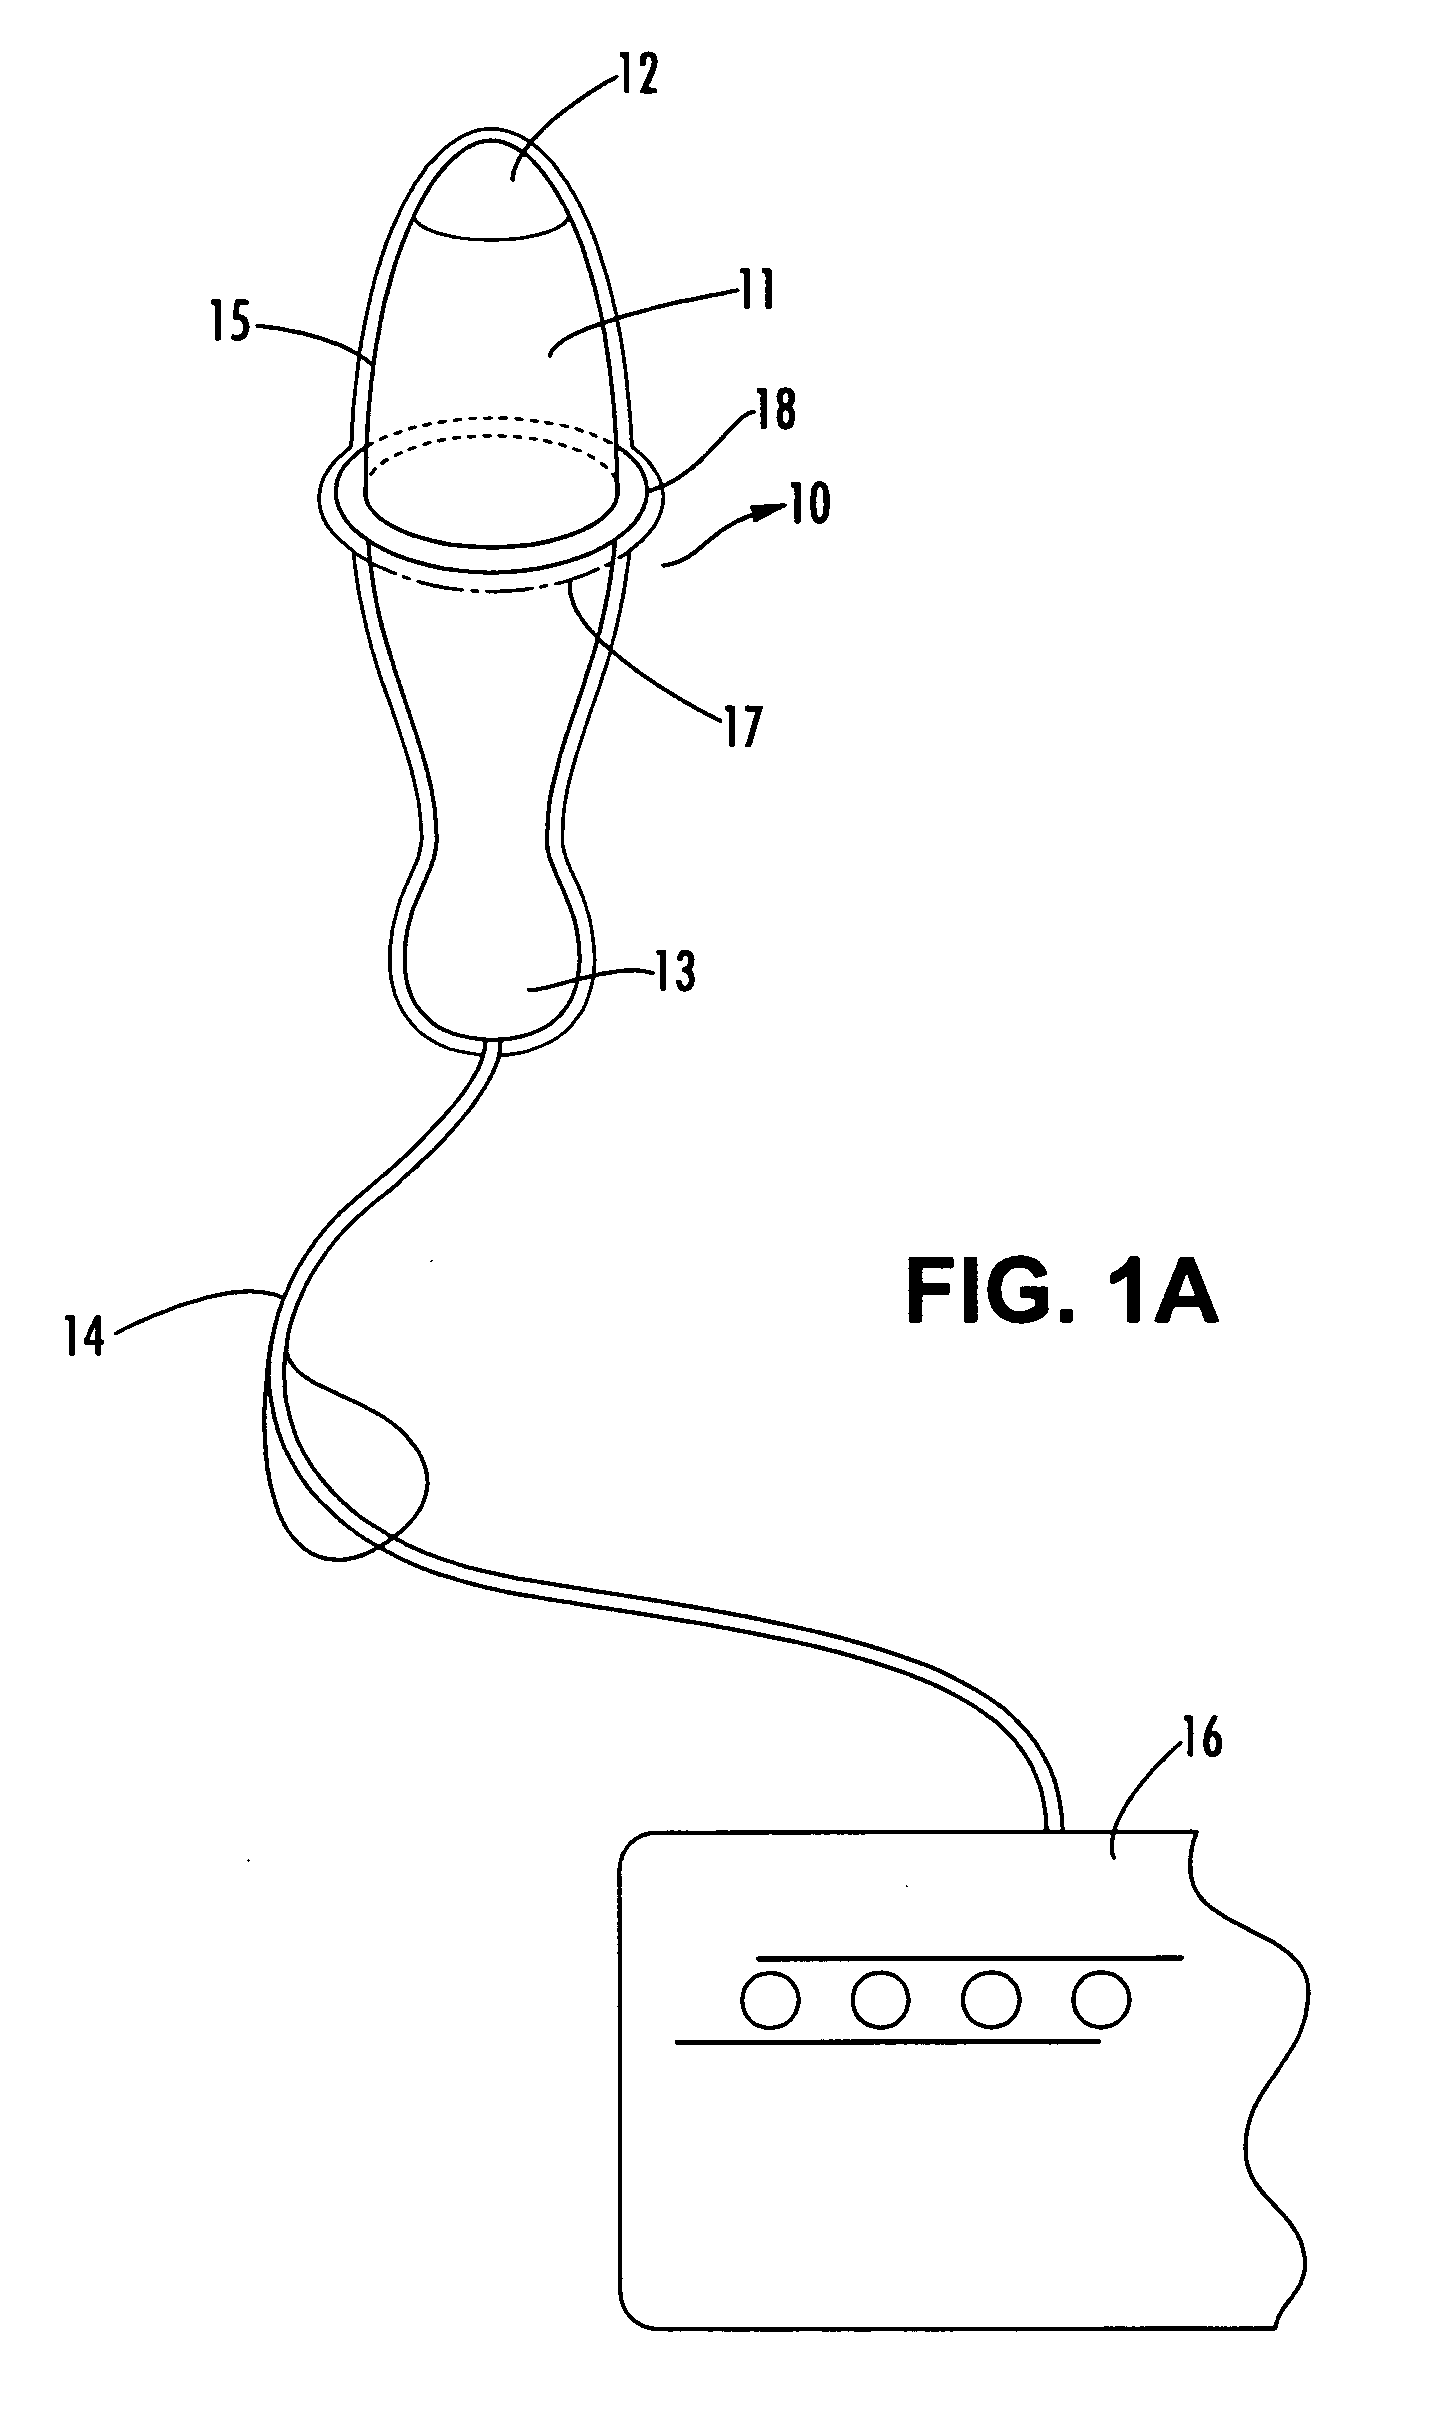 Pelvic muscle exercise device